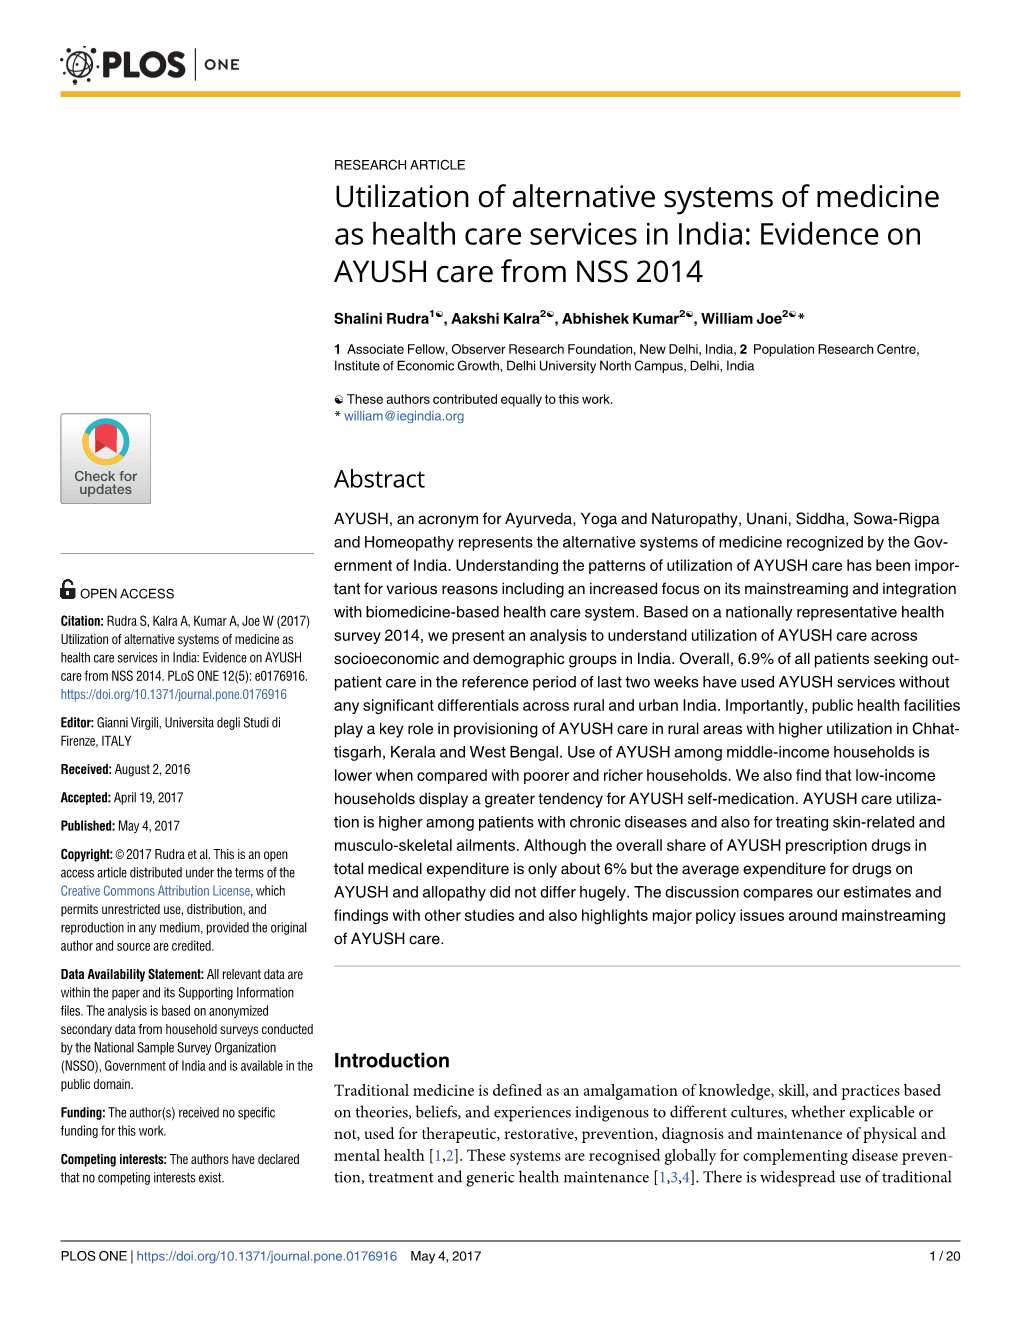 Utilization of Alternative Systems of Medicine As Health Care Services in India: Evidence on AYUSH Care from NSS 2014